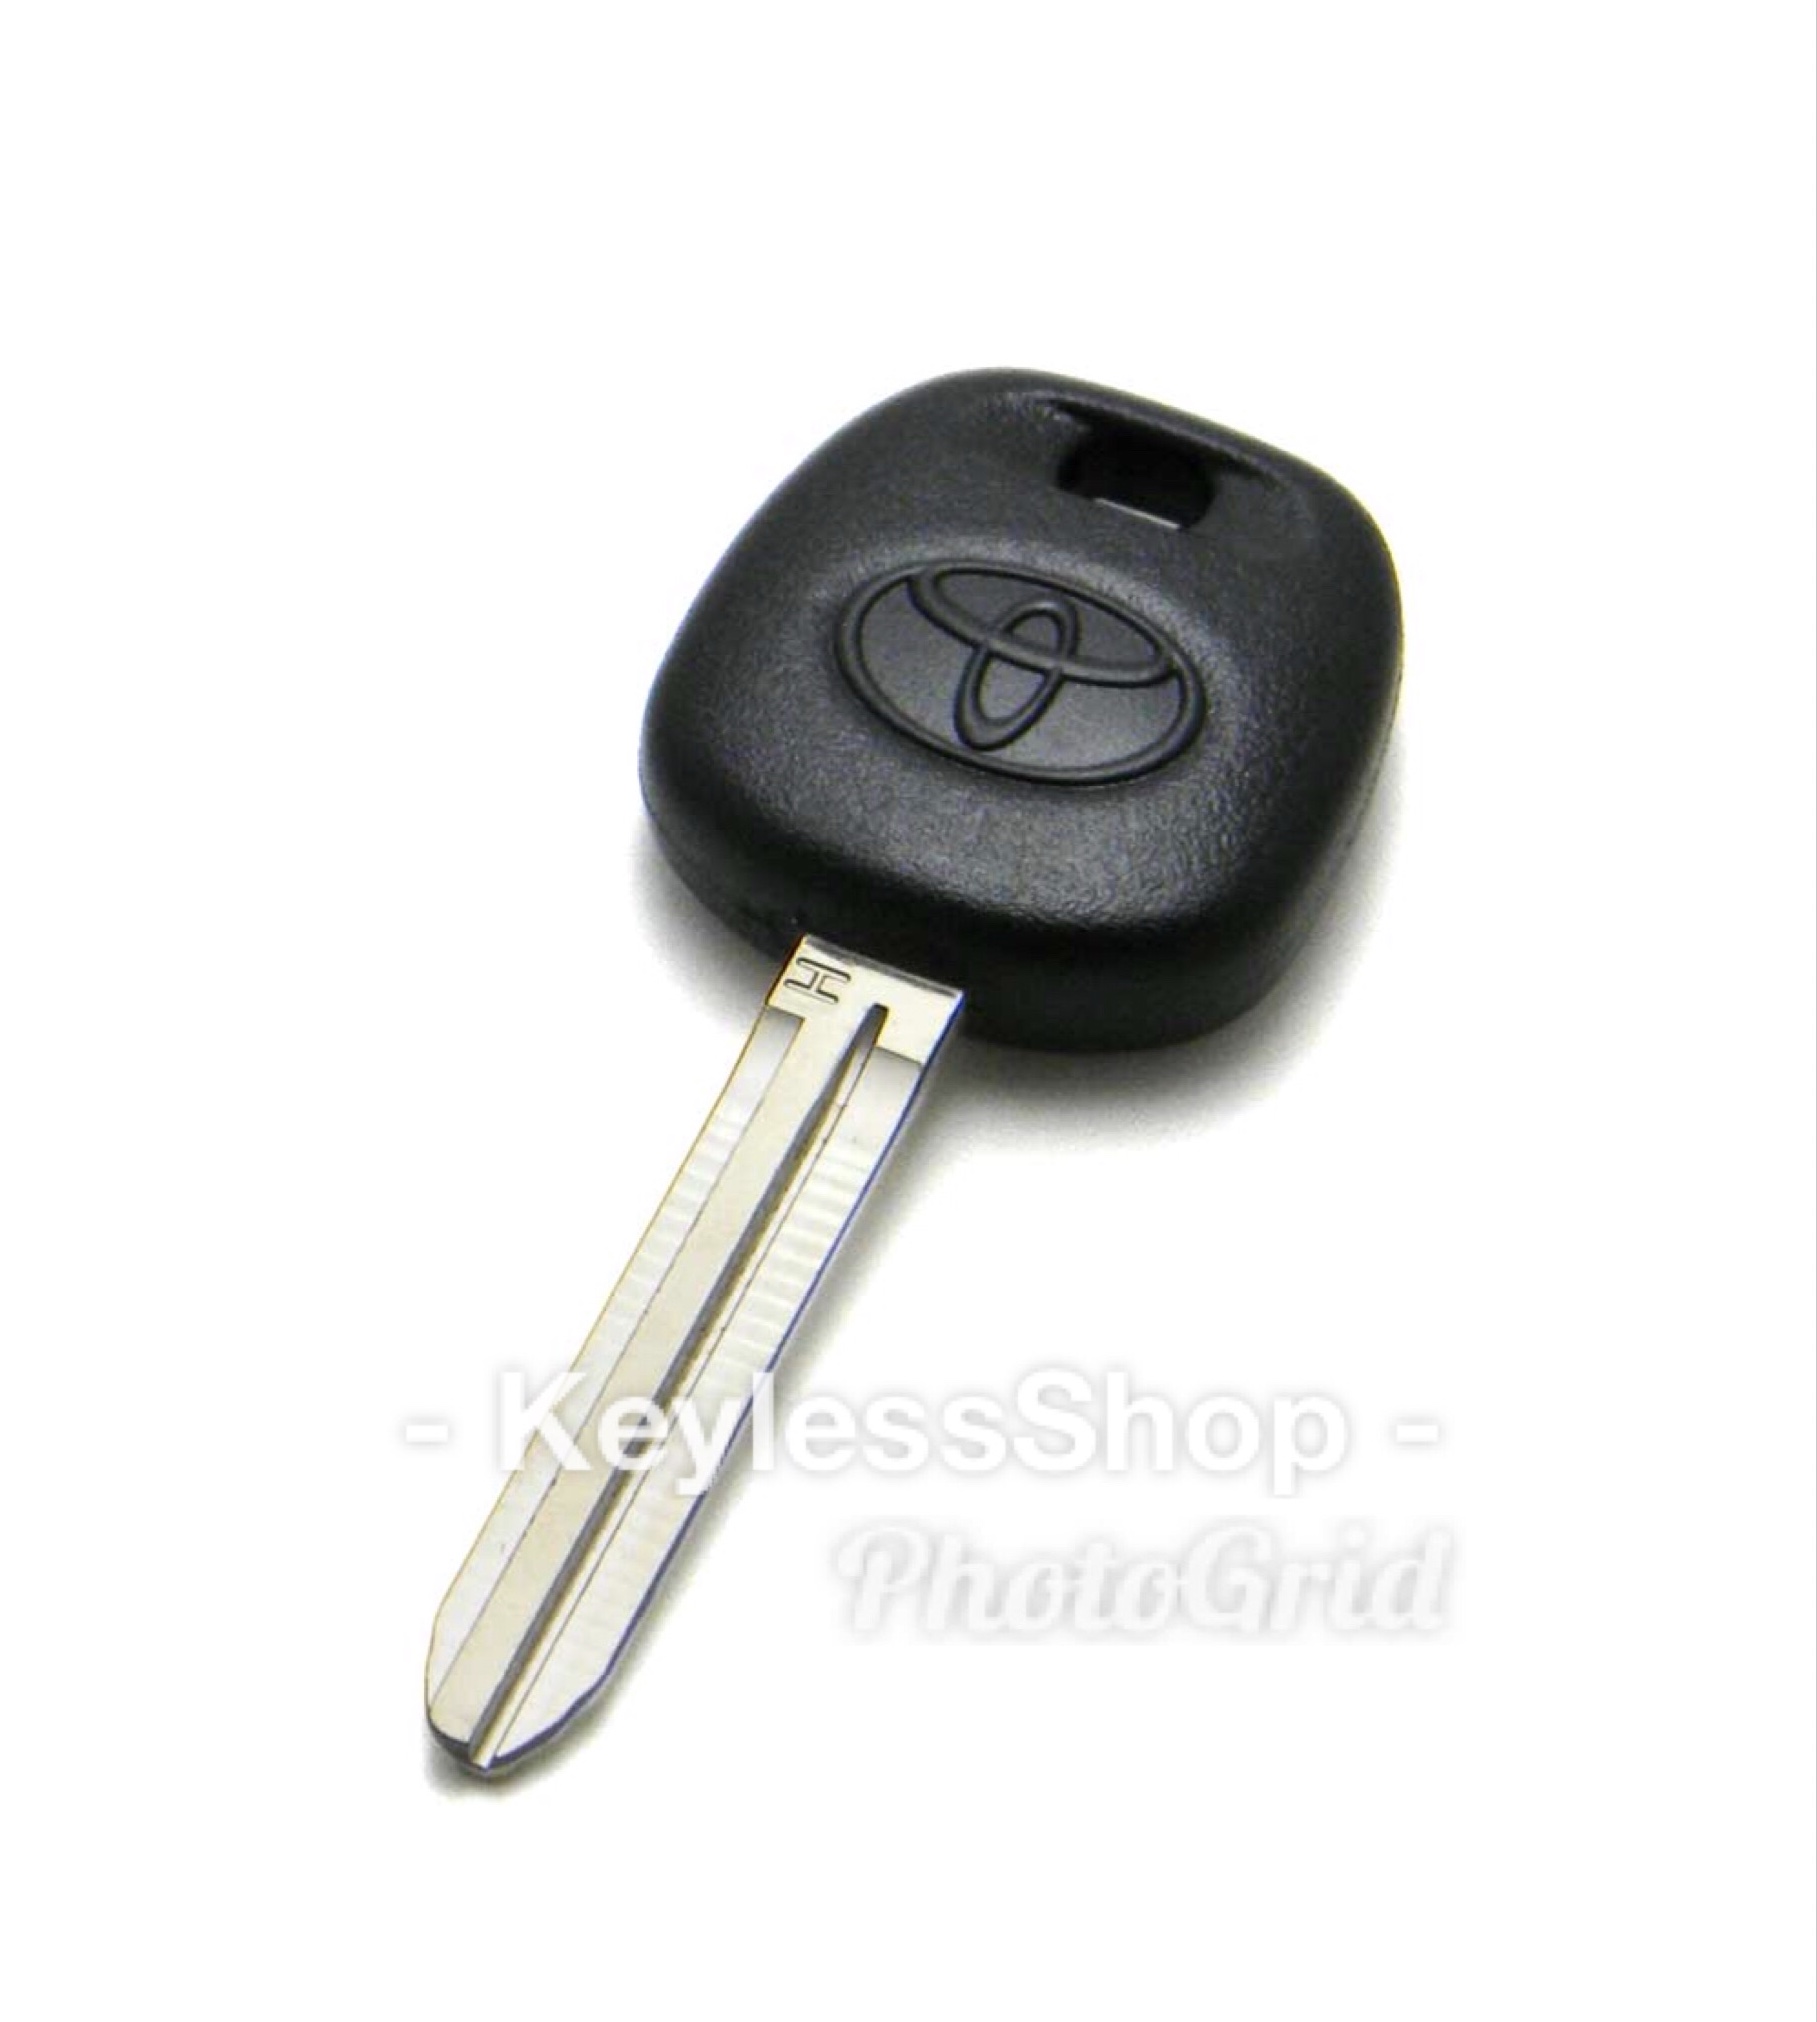 New Toyota Replacement Uncut Transponder Chip Alarm Ignition Key Blade TOY43AT4